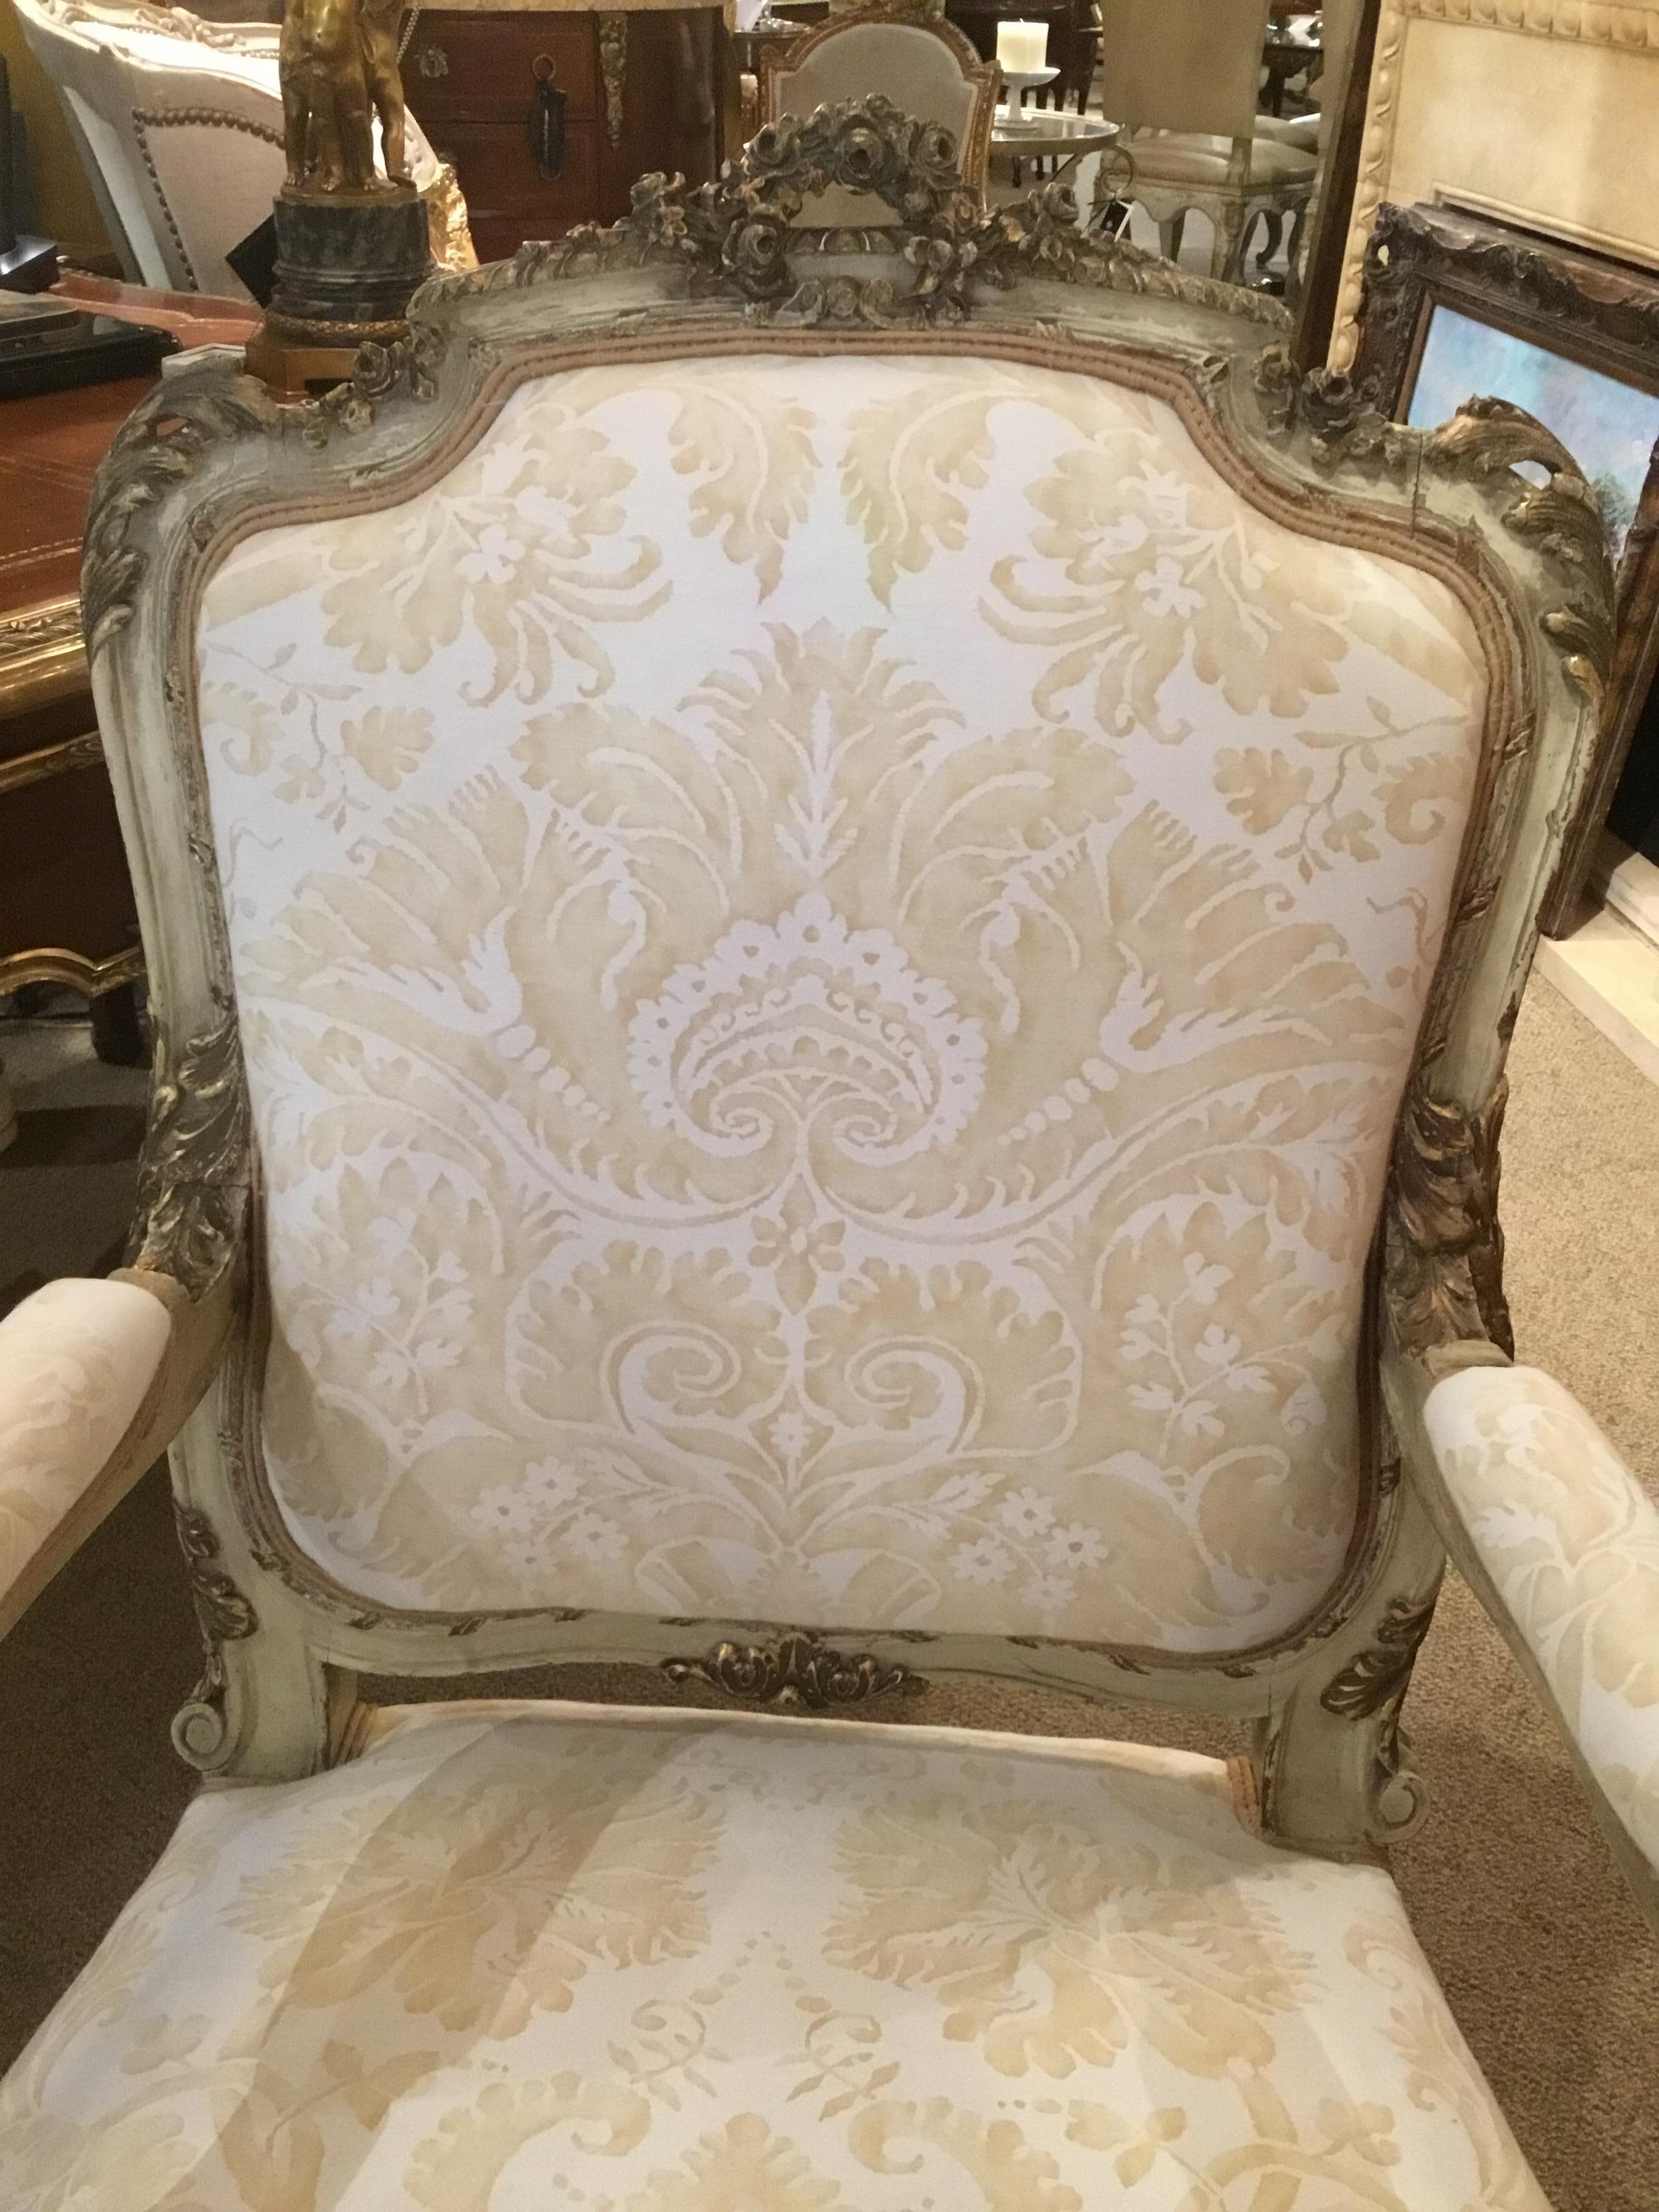 Parcel paint and parcel giltwood carved 19th century armchair or fauteuils
Upholstered in new Fortuny fabric. The finish is in antique condition,
With lovely shades of cream paint and highlights of gold gilt. A crest of
Flowers is centered at the